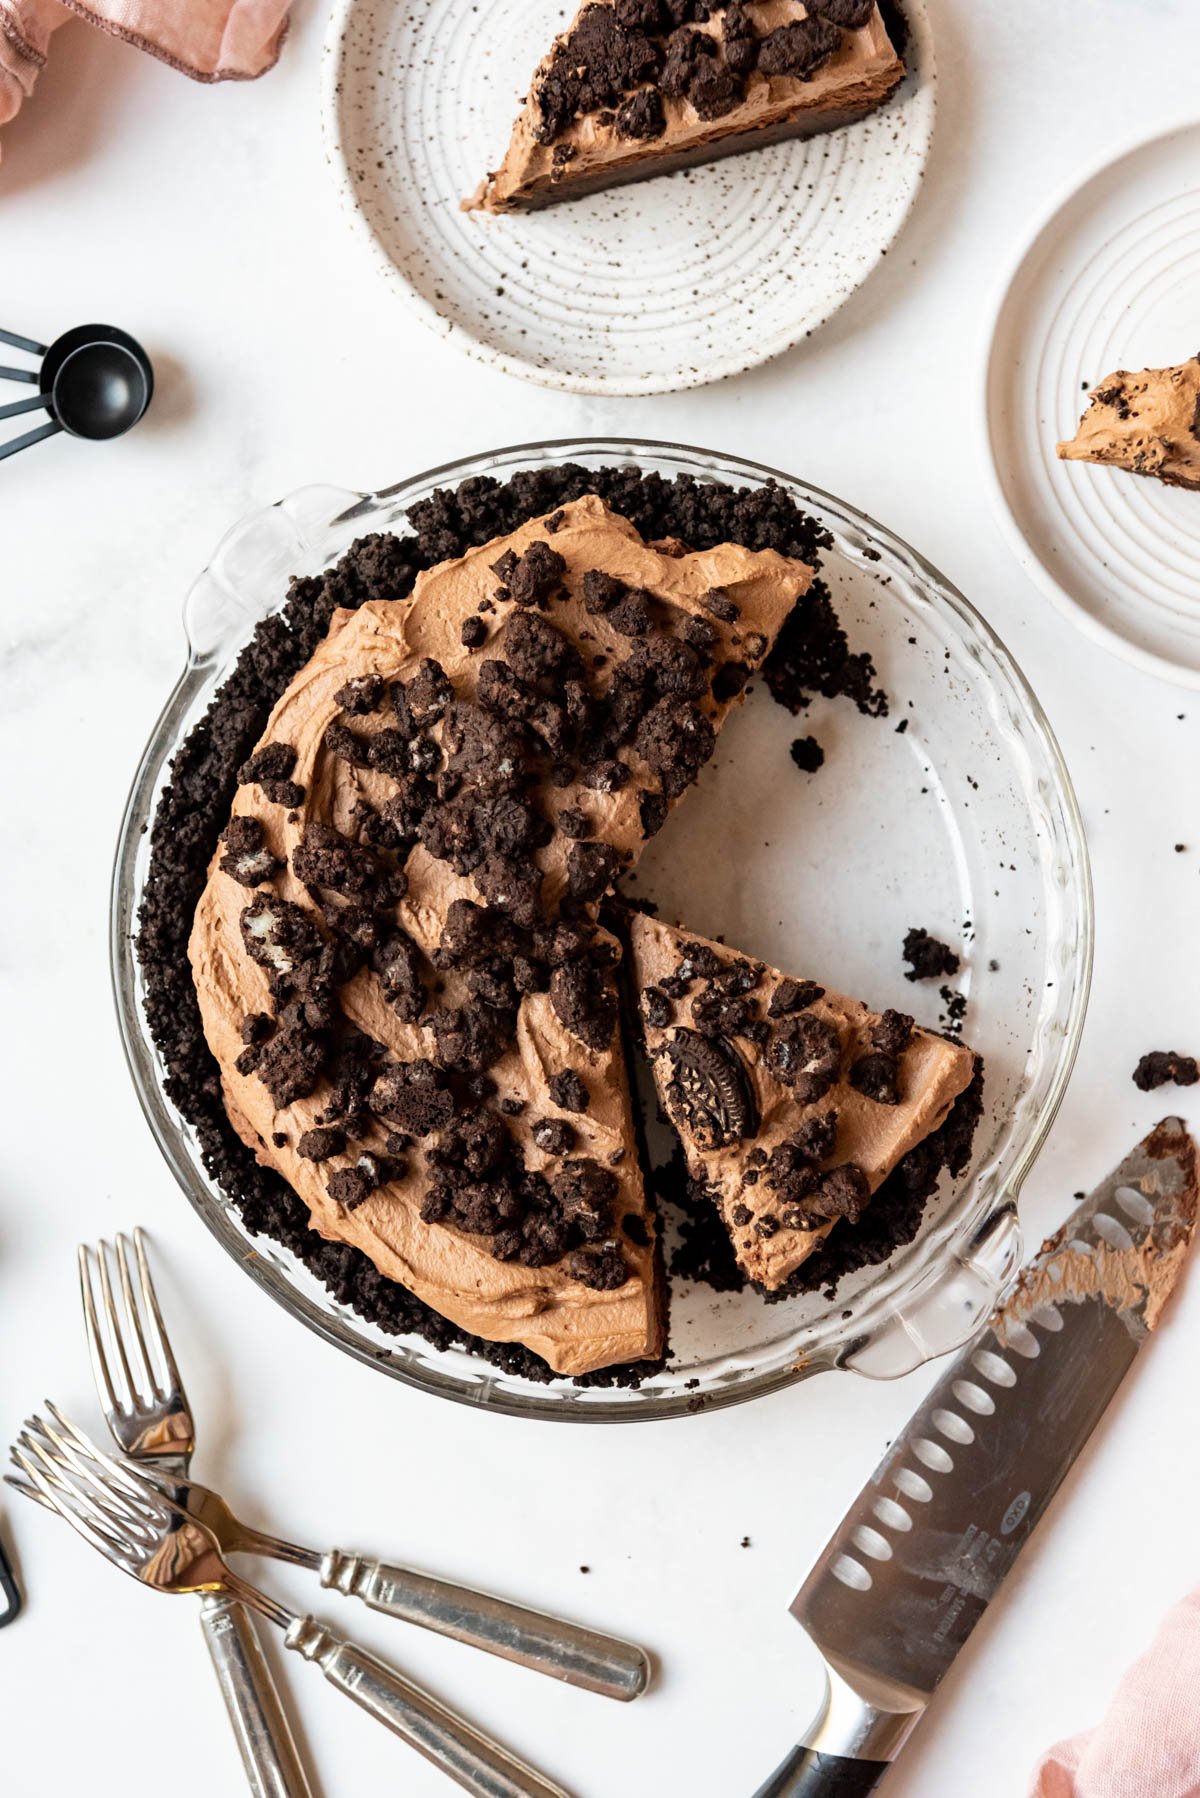 An overhead image of Mississippi mud pie with some slices removed from it.